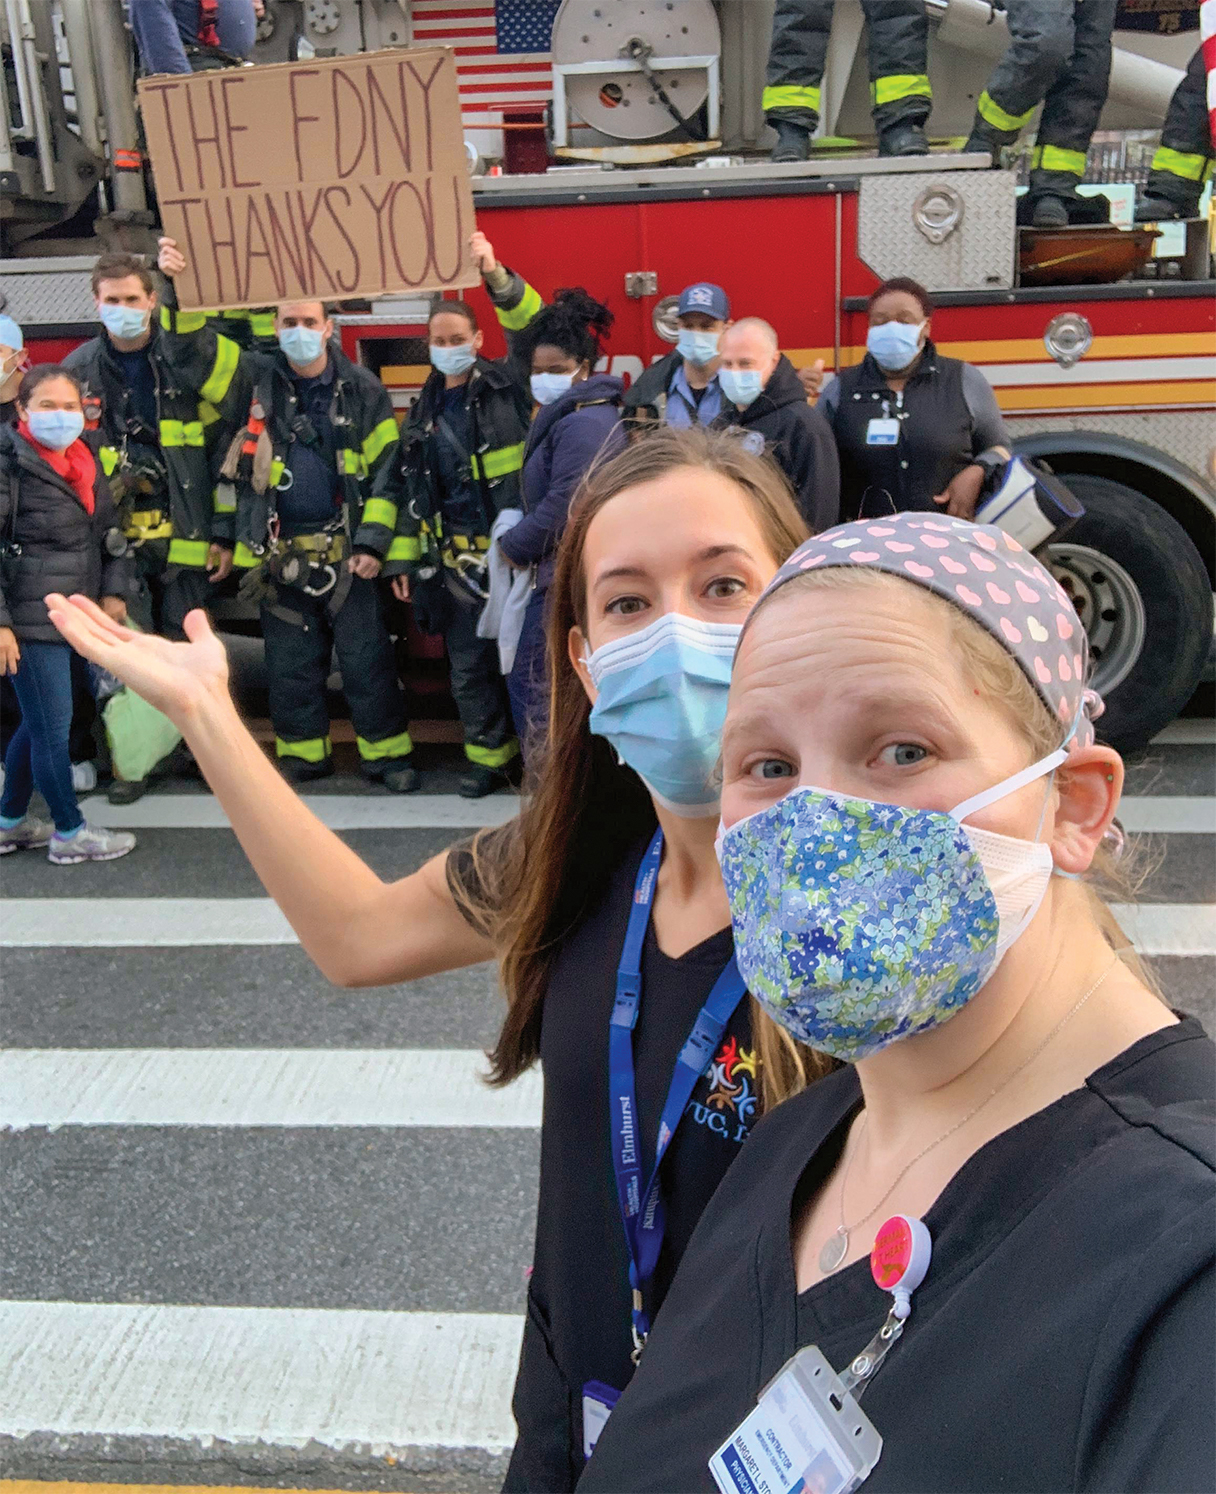 •	Margaret Stowasser poses with the New York City Fire Department and fellow health care workers on the front lines of the pandemic. The fire fighters are standing in front of a fire truck holding a sign that says 